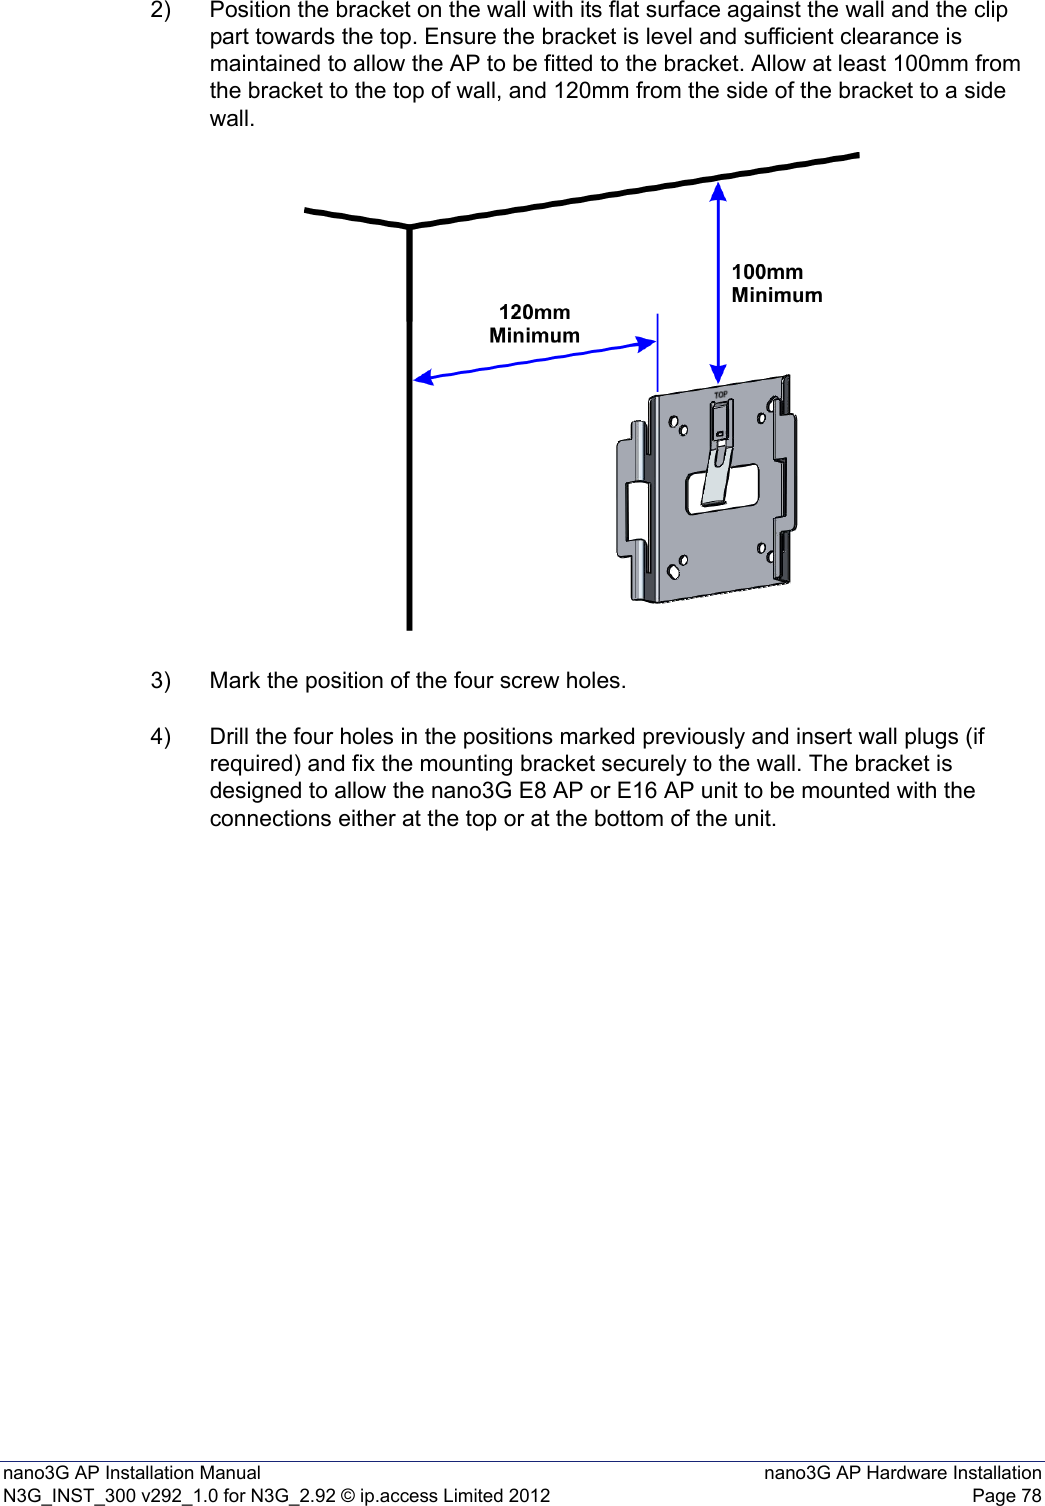 nano3G AP Installation Manual nano3G AP Hardware InstallationN3G_INST_300 v292_1.0 for N3G_2.92 © ip.access Limited 2012 Page 782) Position the bracket on the wall with its flat surface against the wall and the clip part towards the top. Ensure the bracket is level and sufficient clearance is maintained to allow the AP to be fitted to the bracket. Allow at least 100mm from the bracket to the top of wall, and 120mm from the side of the bracket to a side wall.3) Mark the position of the four screw holes.4) Drill the four holes in the positions marked previously and insert wall plugs (if required) and fix the mounting bracket securely to the wall. The bracket is designed to allow the nano3G E8 AP or E16 AP unit to be mounted with the connections either at the top or at the bottom of the unit.